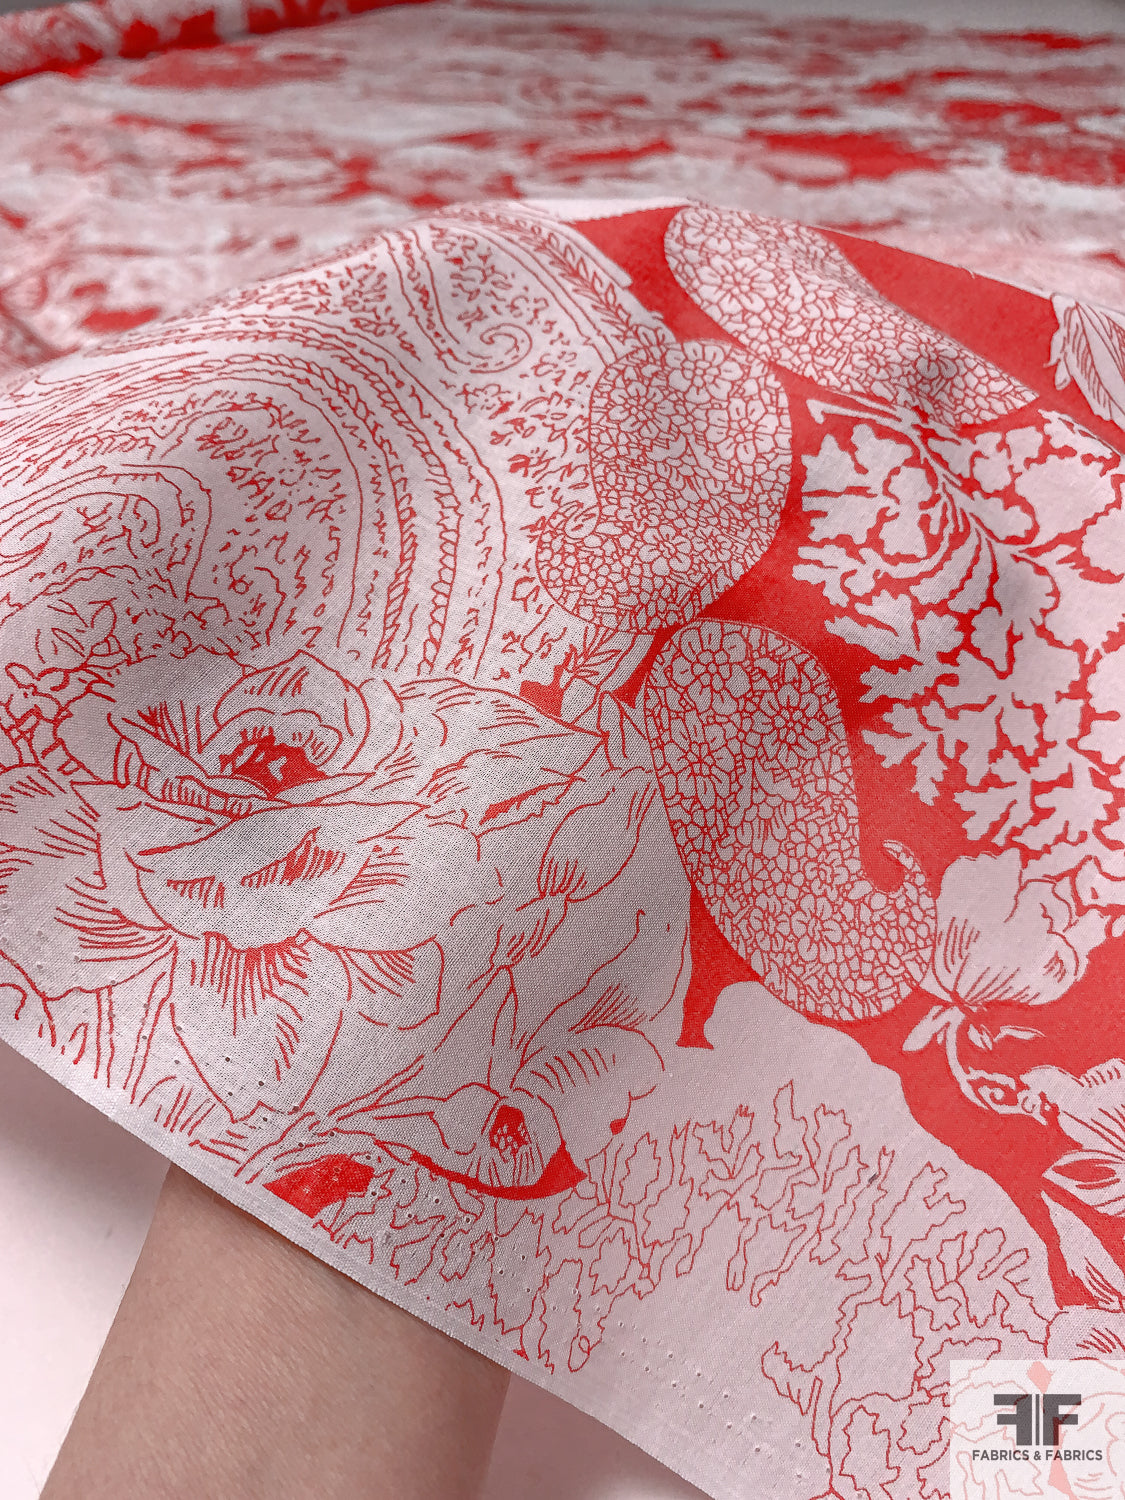 Exotic Paisley and Floral Printed Cotton Lawn - Coral Red / Off-White